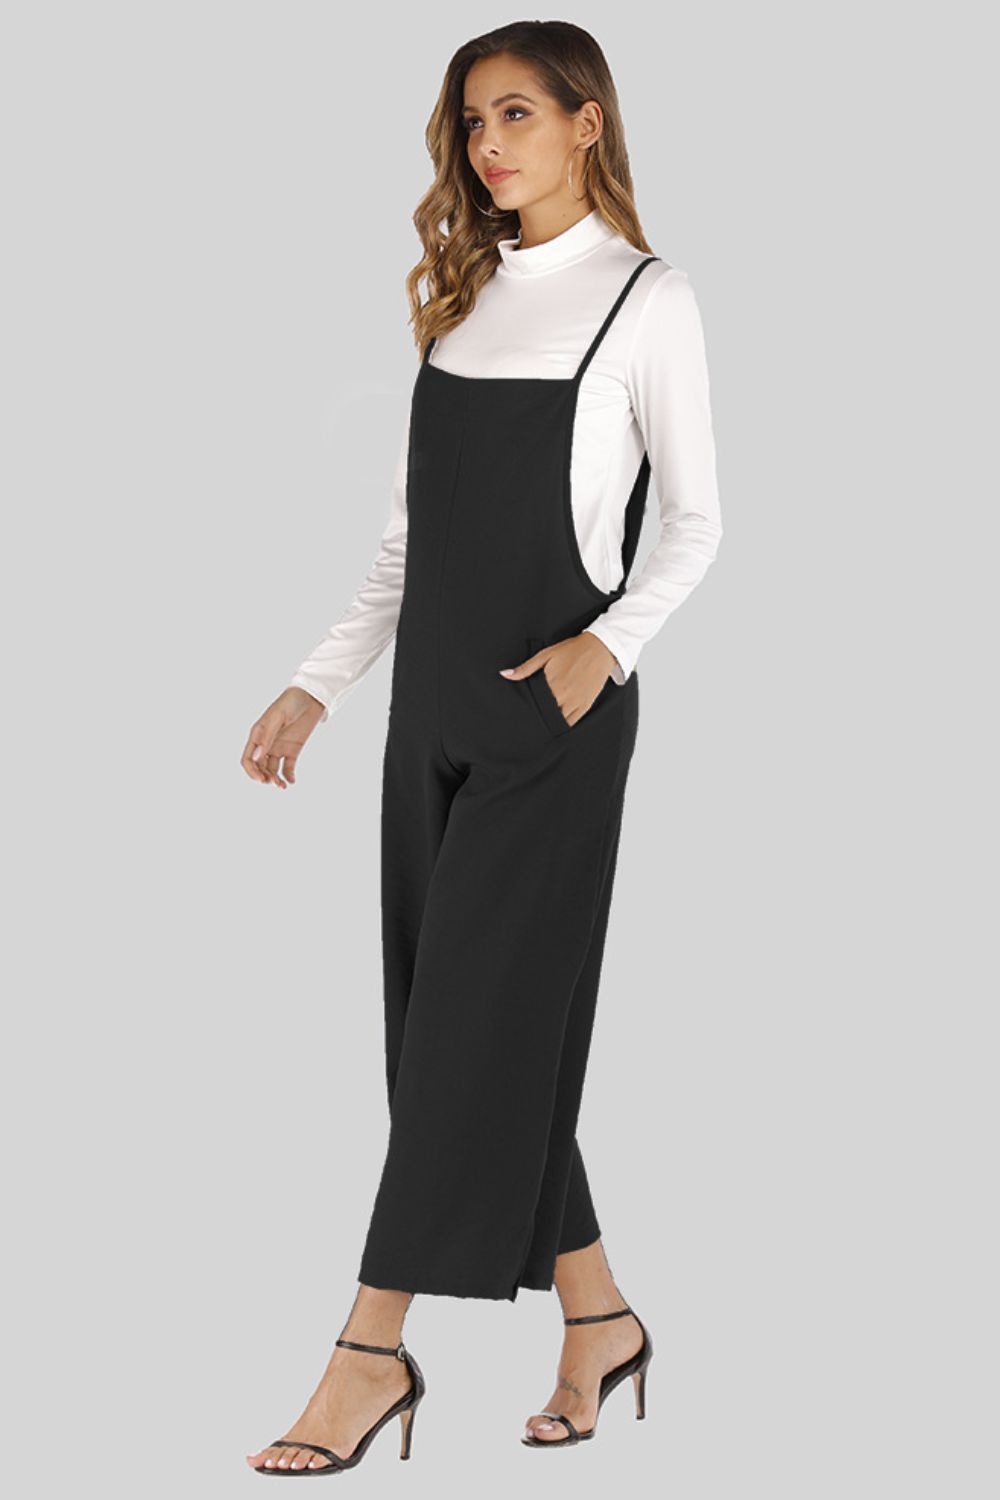 Ohai Cropped Wide Leg Overalls with Pockets S-5XL